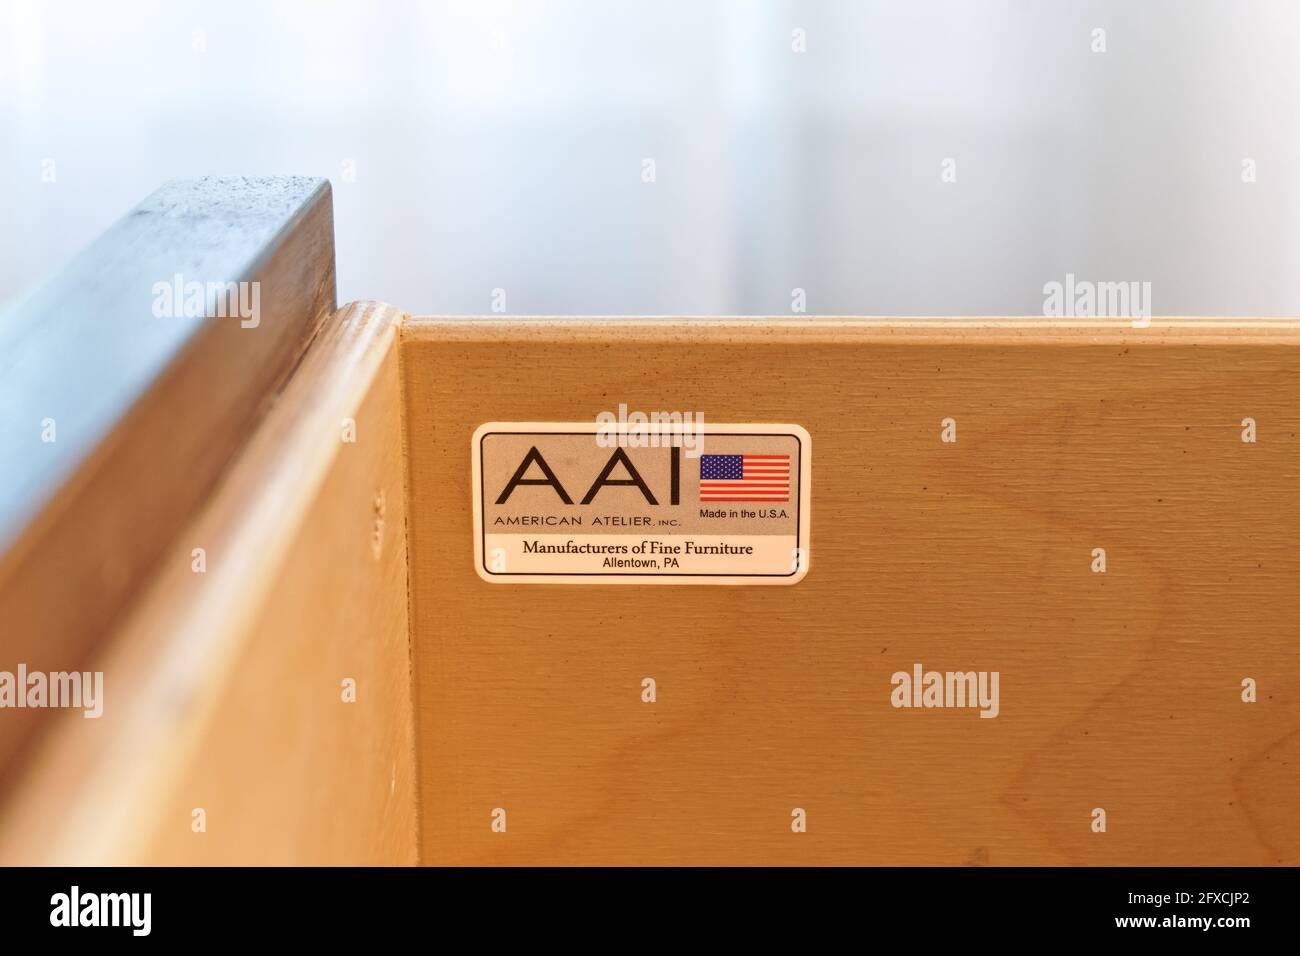 Galloway, NJ - May 14, 2021: Label inside the drawer of a hotel nightstand made by American Atelier, Inc. AAI manufactures custom furniture in Allento Stock Photo